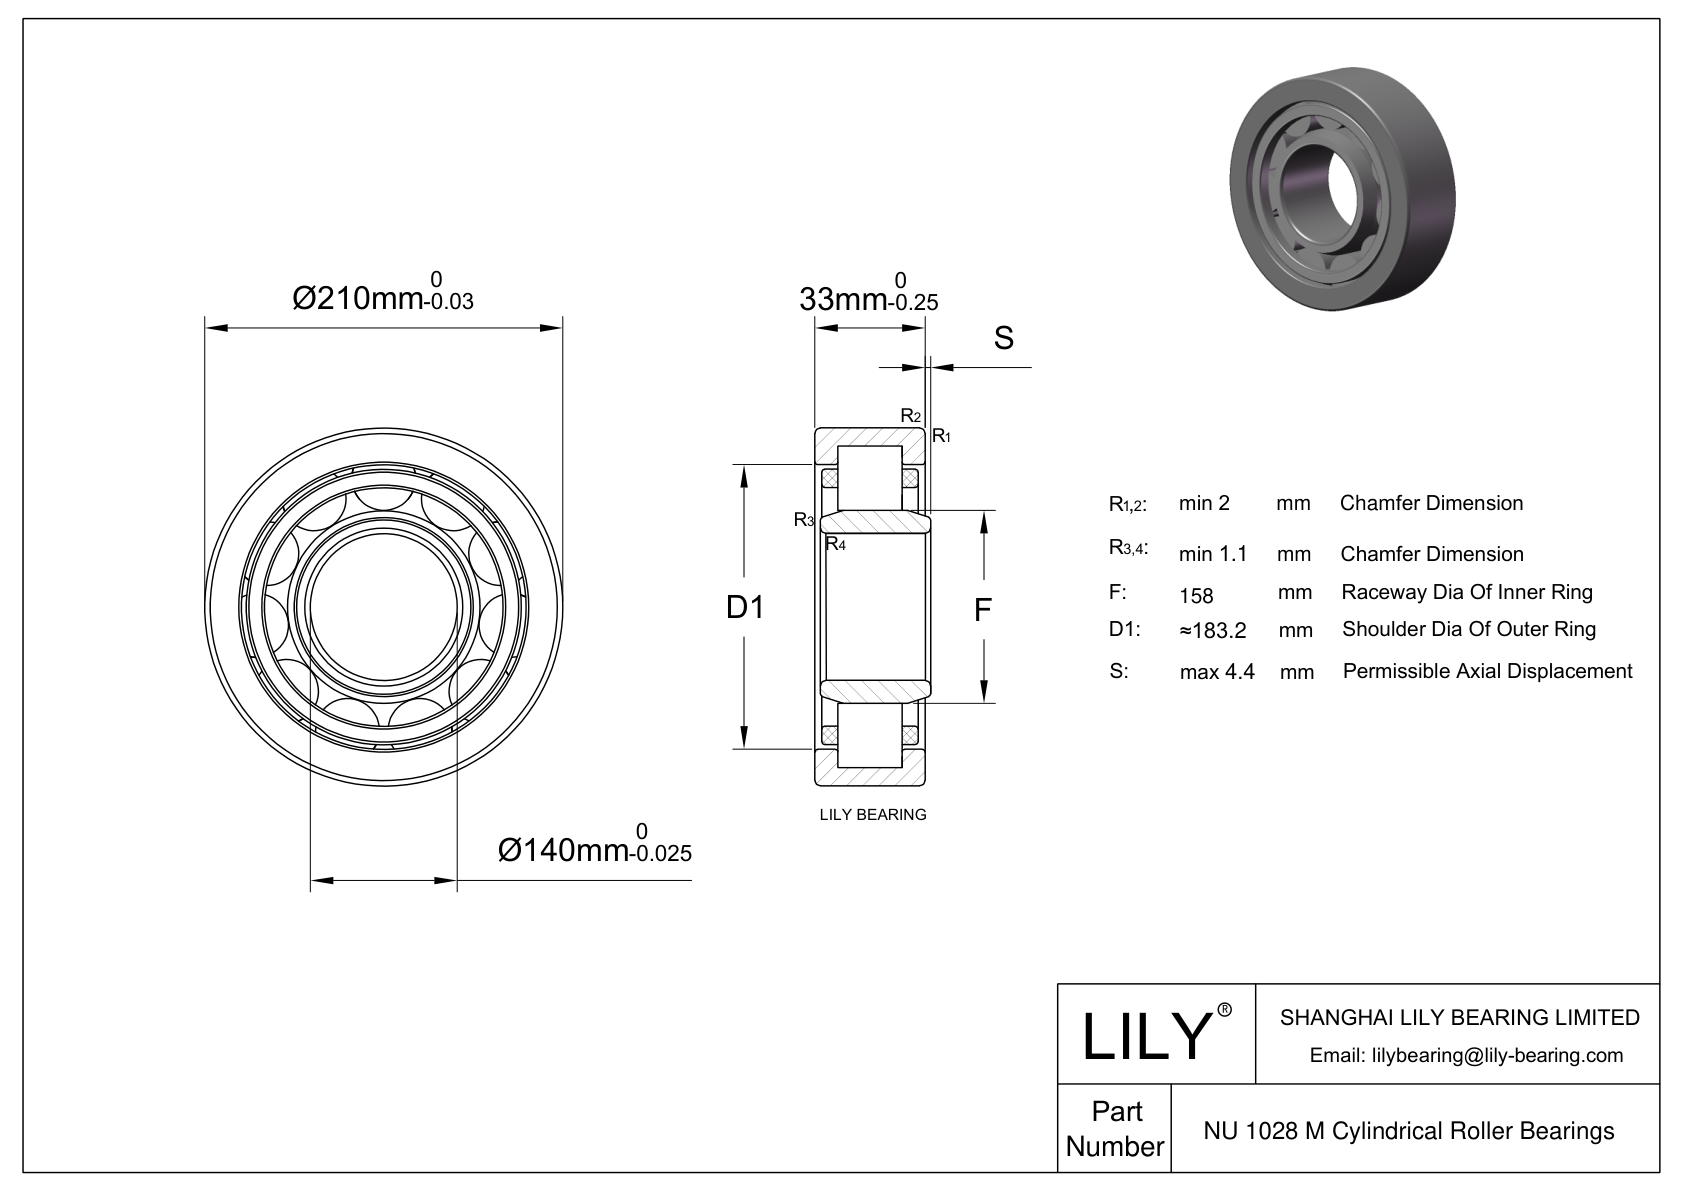 NU 1028 M/C3VL2071 Ceramic Coated Cylindrical Roller Bearings cad drawing